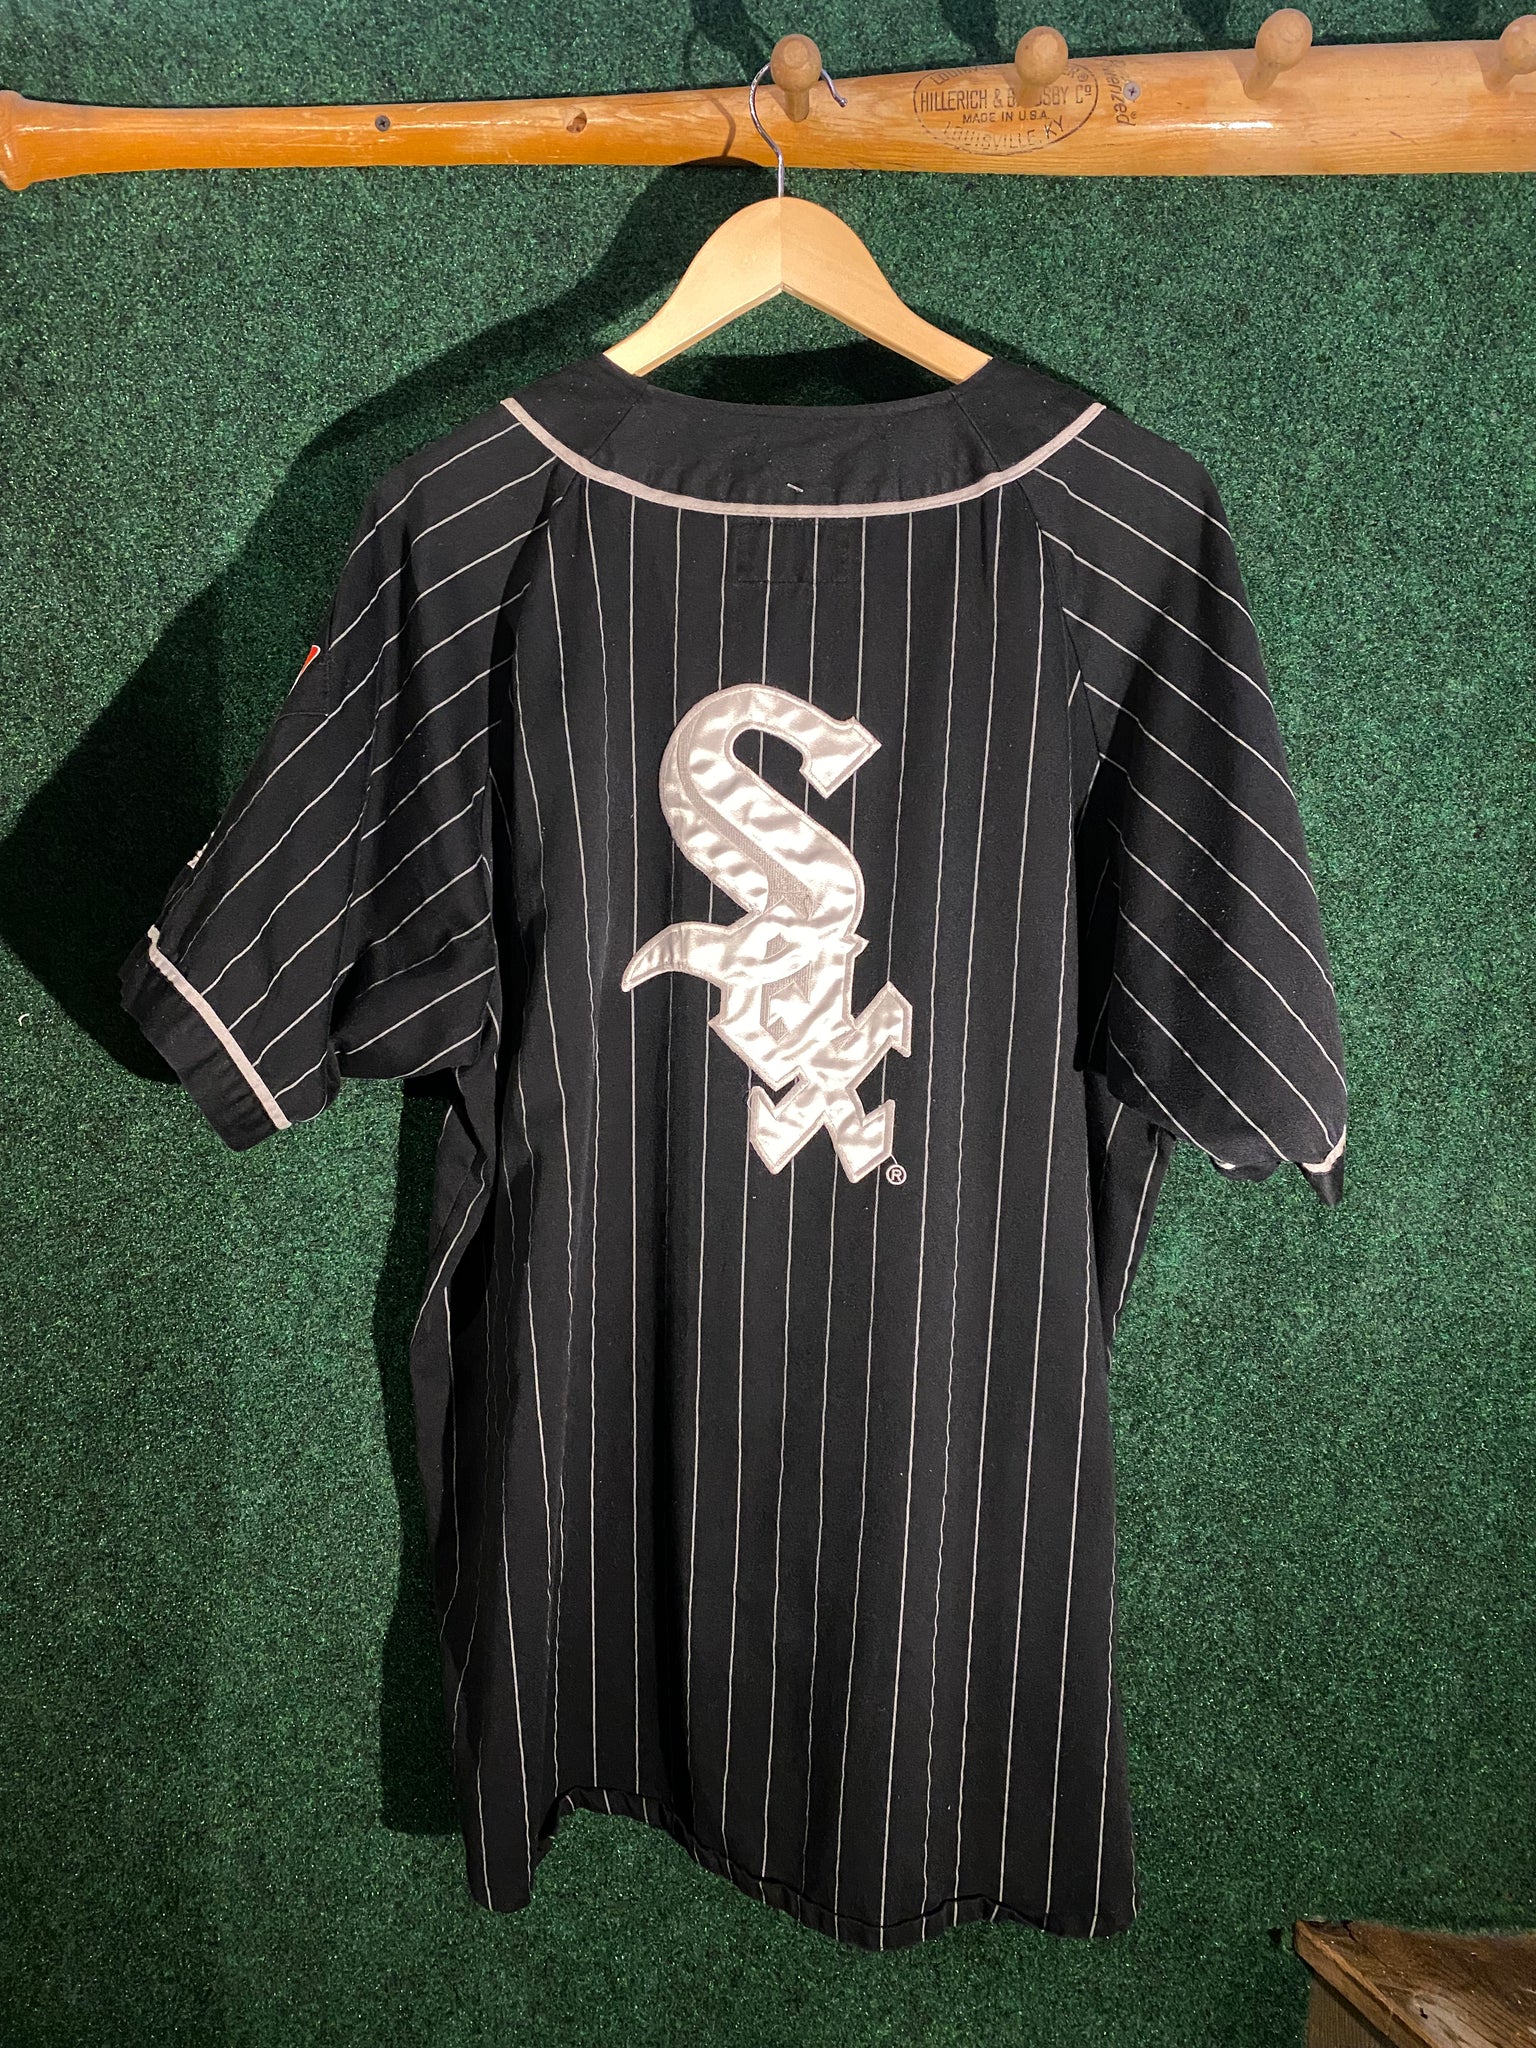 green chicago white sox jersey